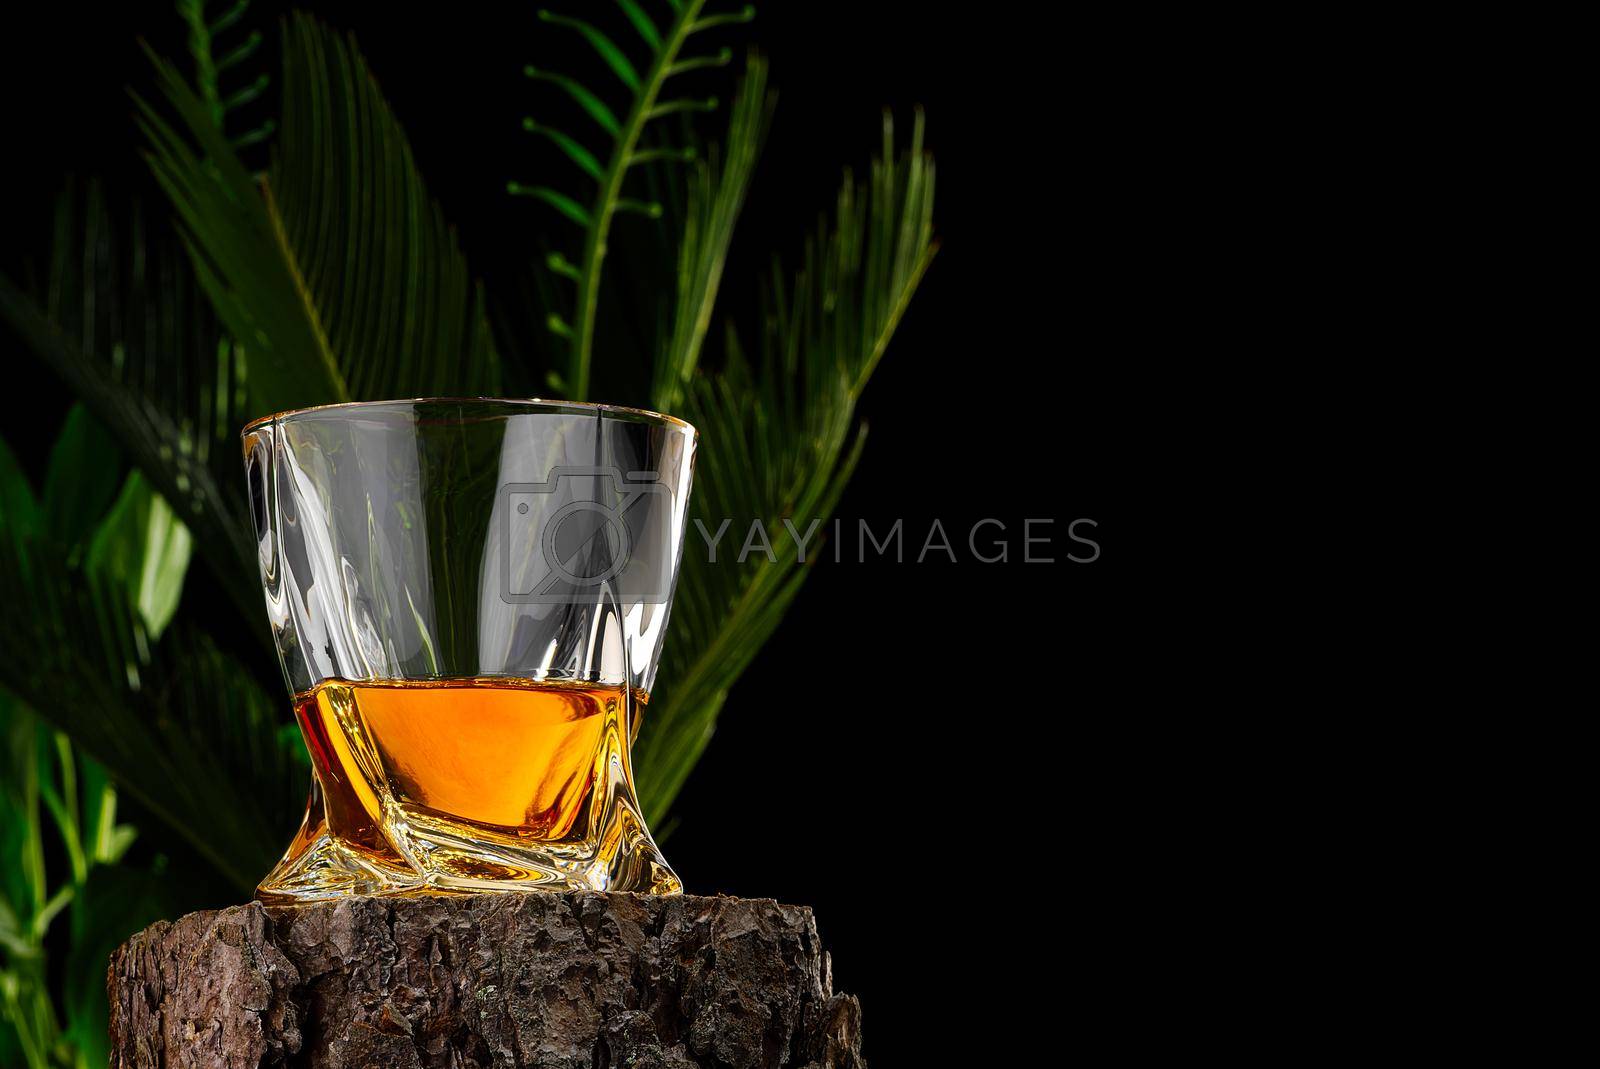 Royalty free image of Wisky glass on wooden log on black background. Wisky glass without ice by PhotoTime